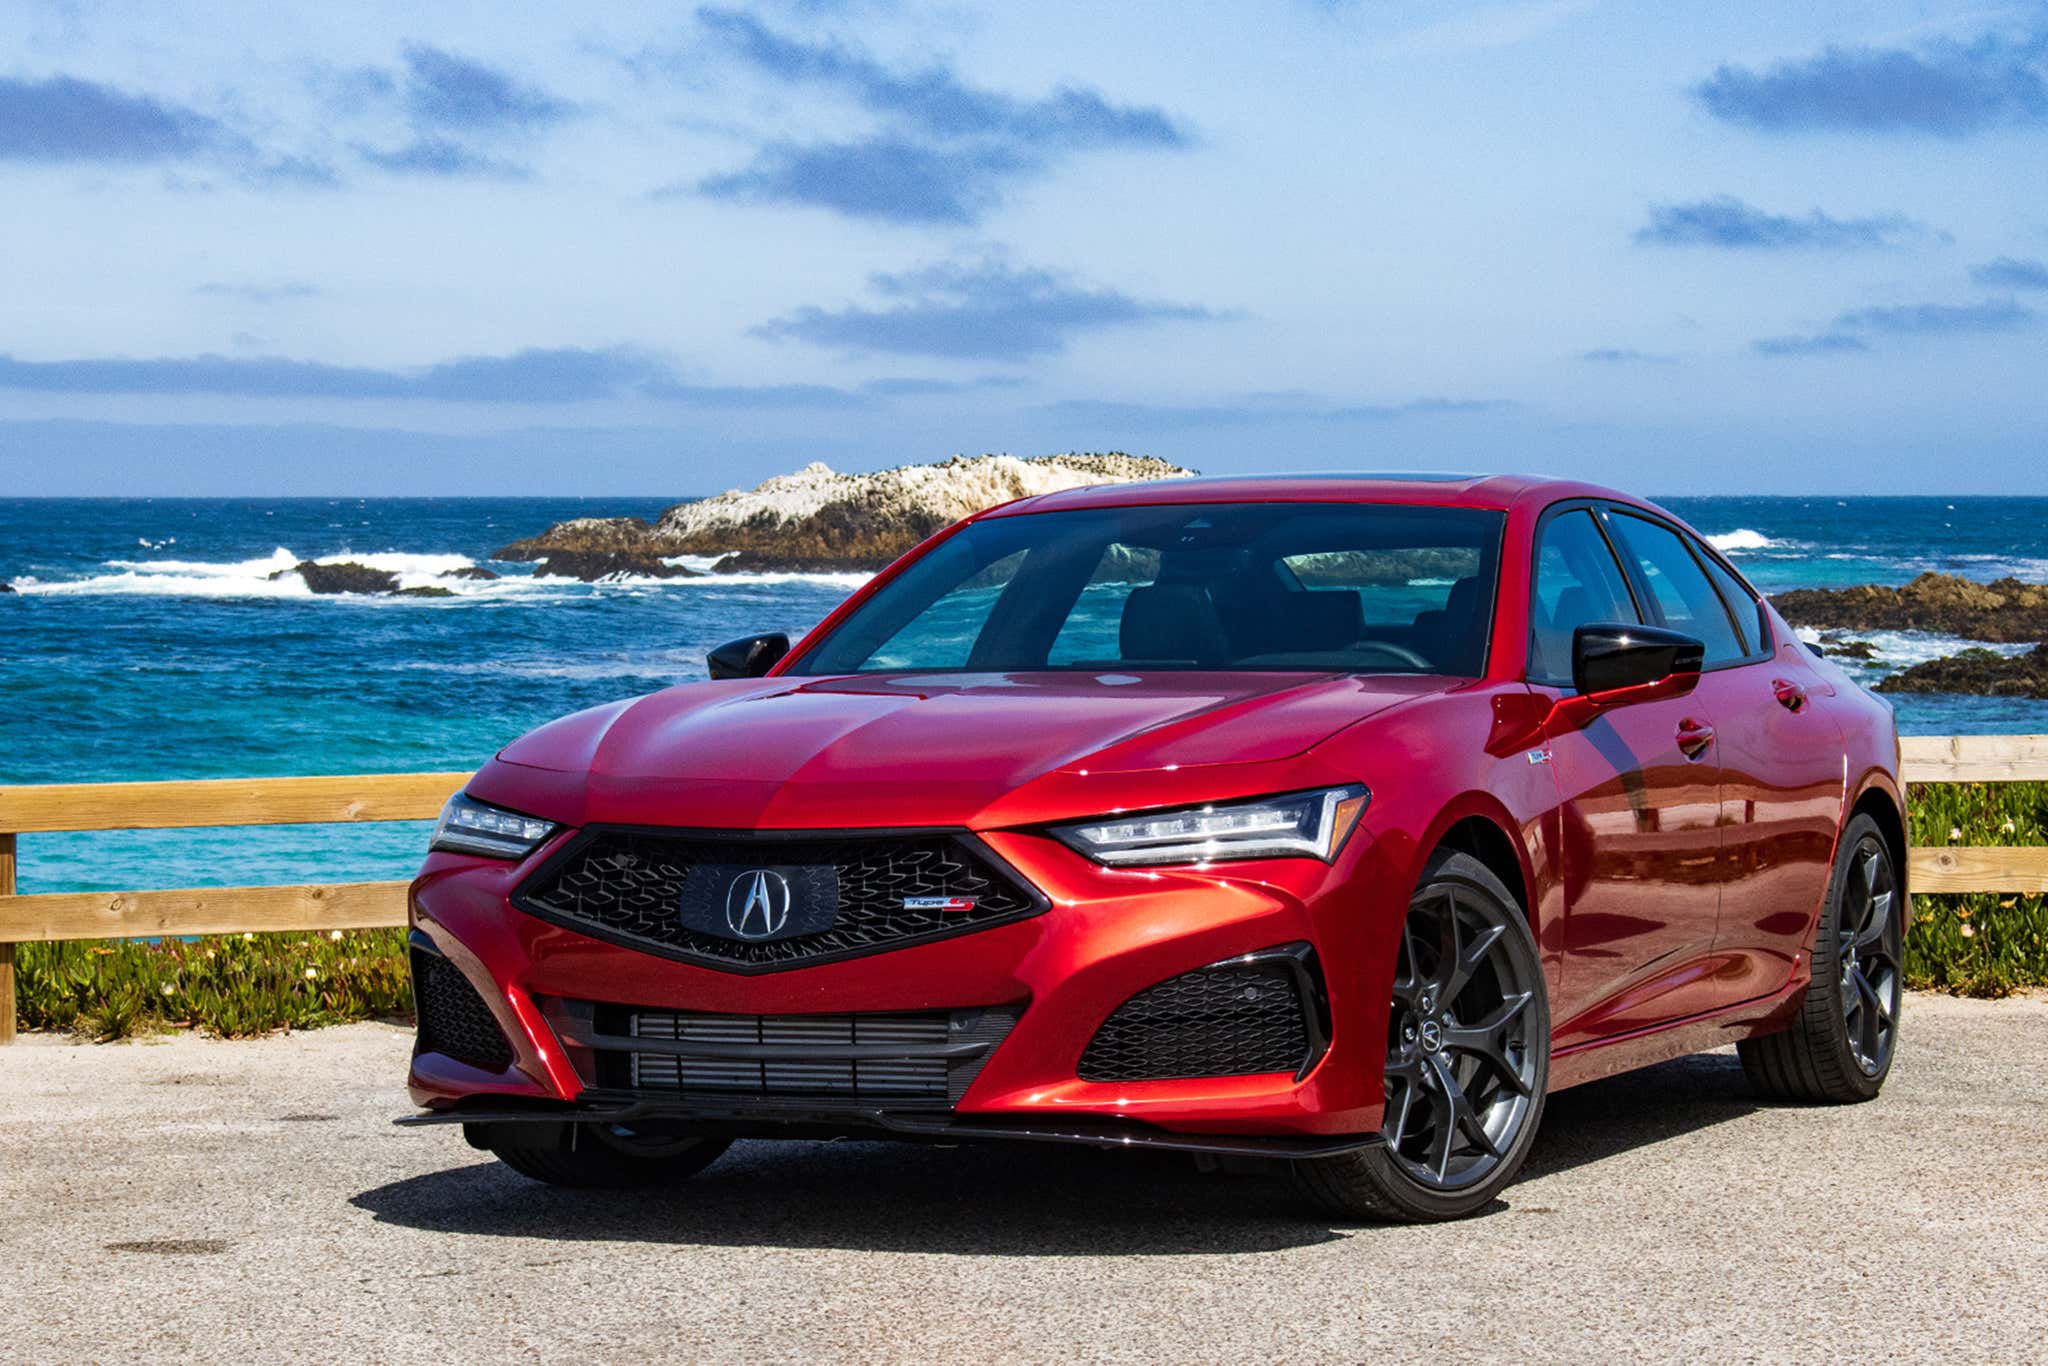 2021 Acura TLX Type S Review: The Best-Handling Acura This Side of an NSX